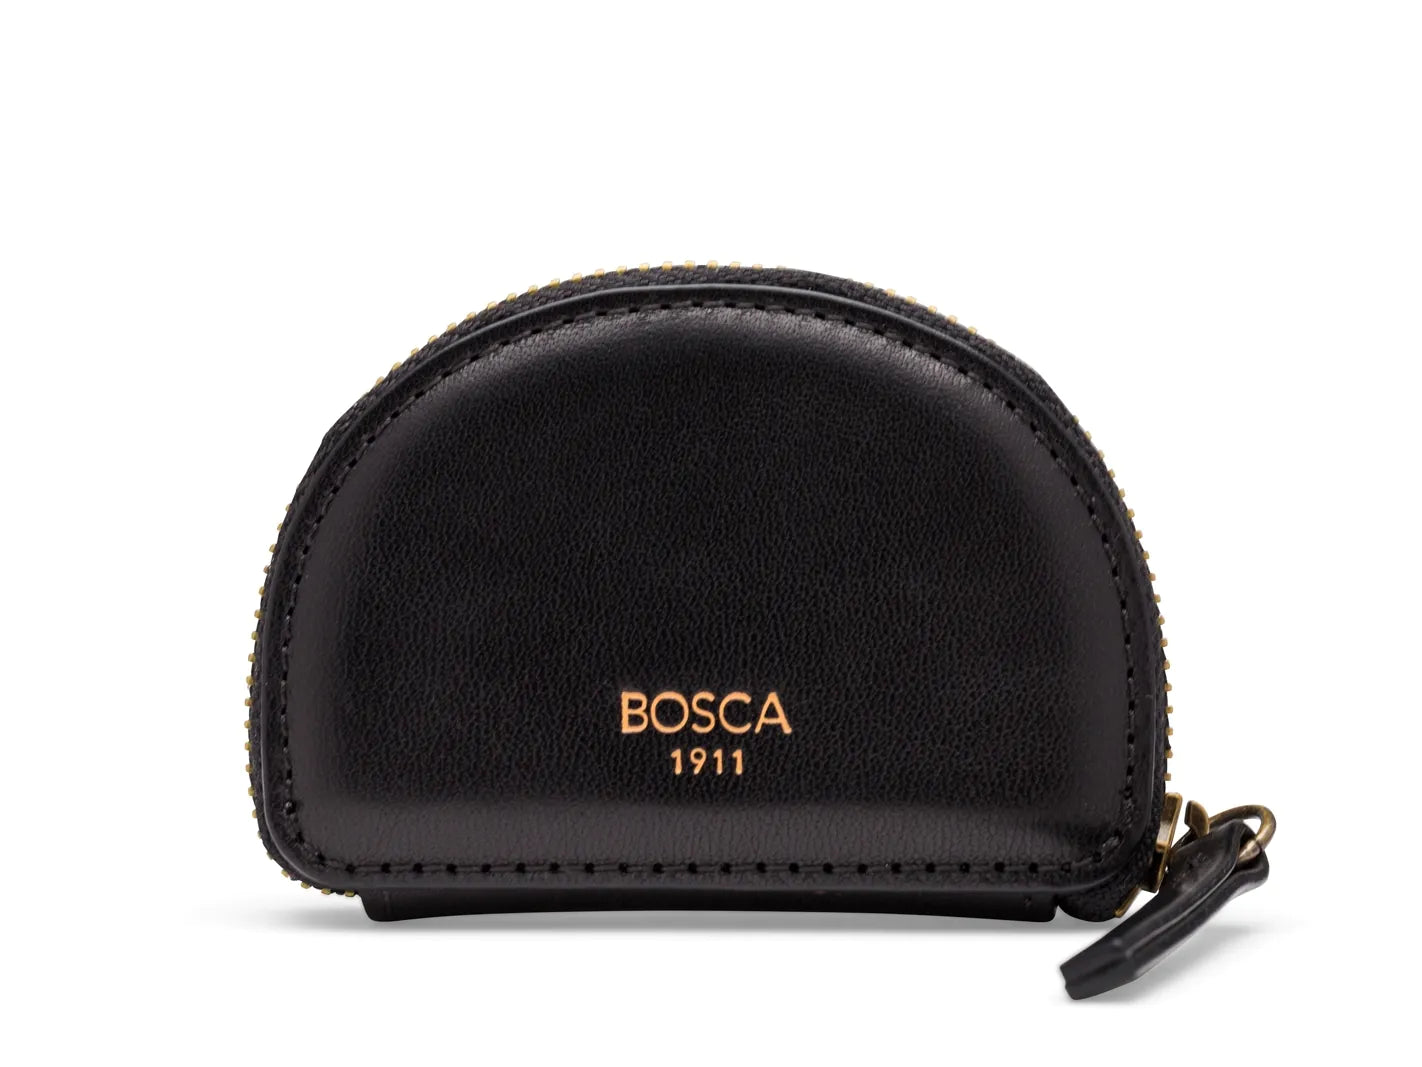 Bosca Unisex Zipper Leather Coin Purse / Key Fob - Black. Mens Wallets at Revolucion in Vancouver